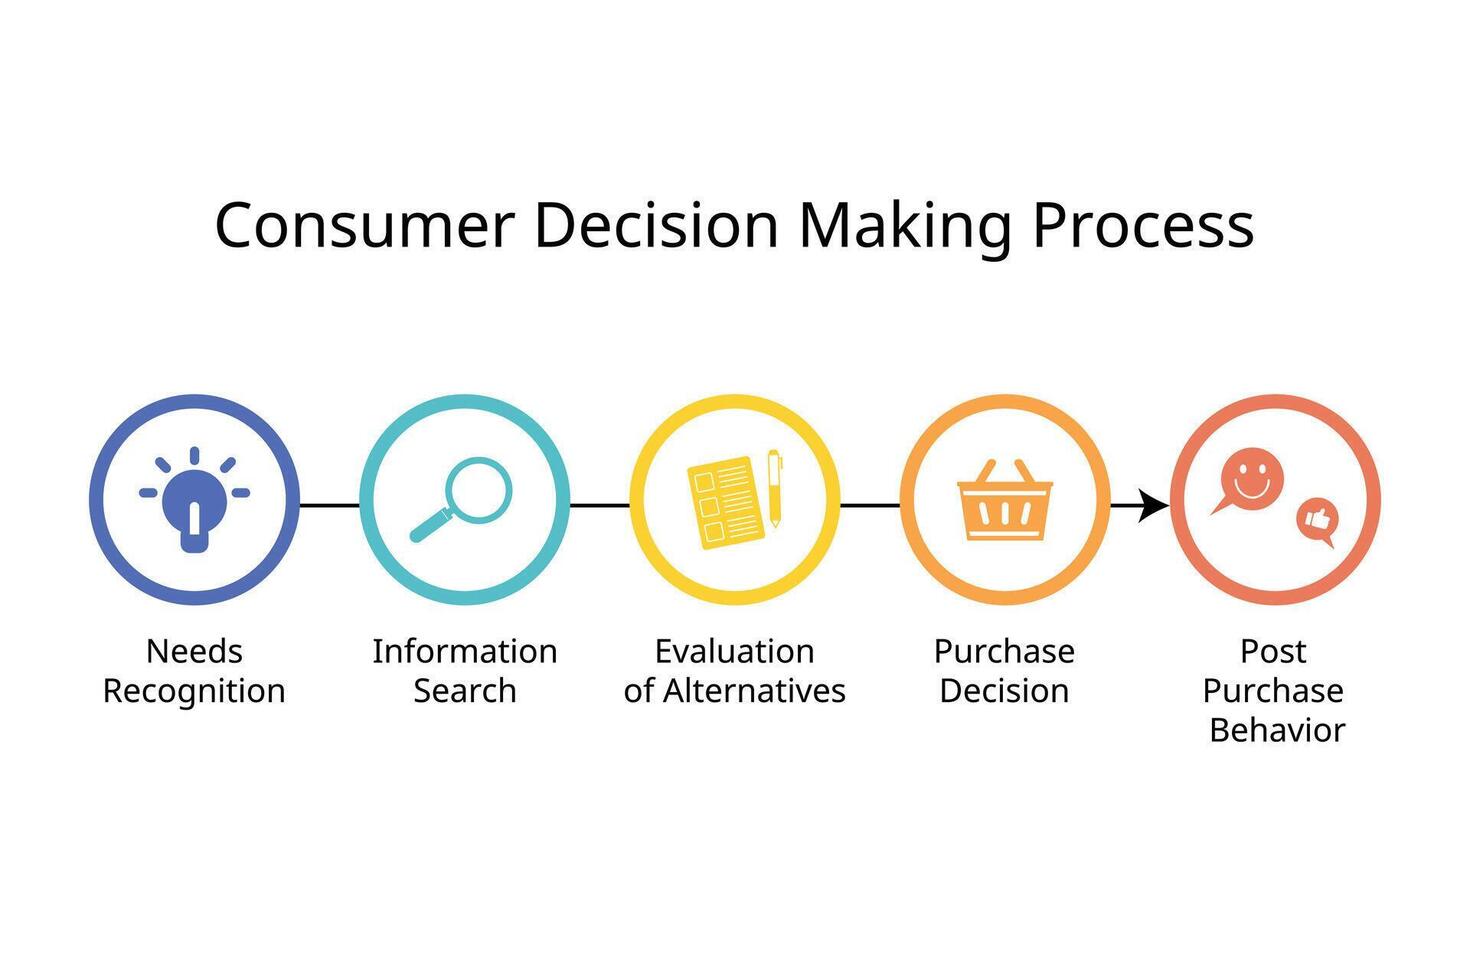 Consumer decision making process consists of needs recognition, information search, evaluation of alternatives, purchase decision, post purchase behavior vector